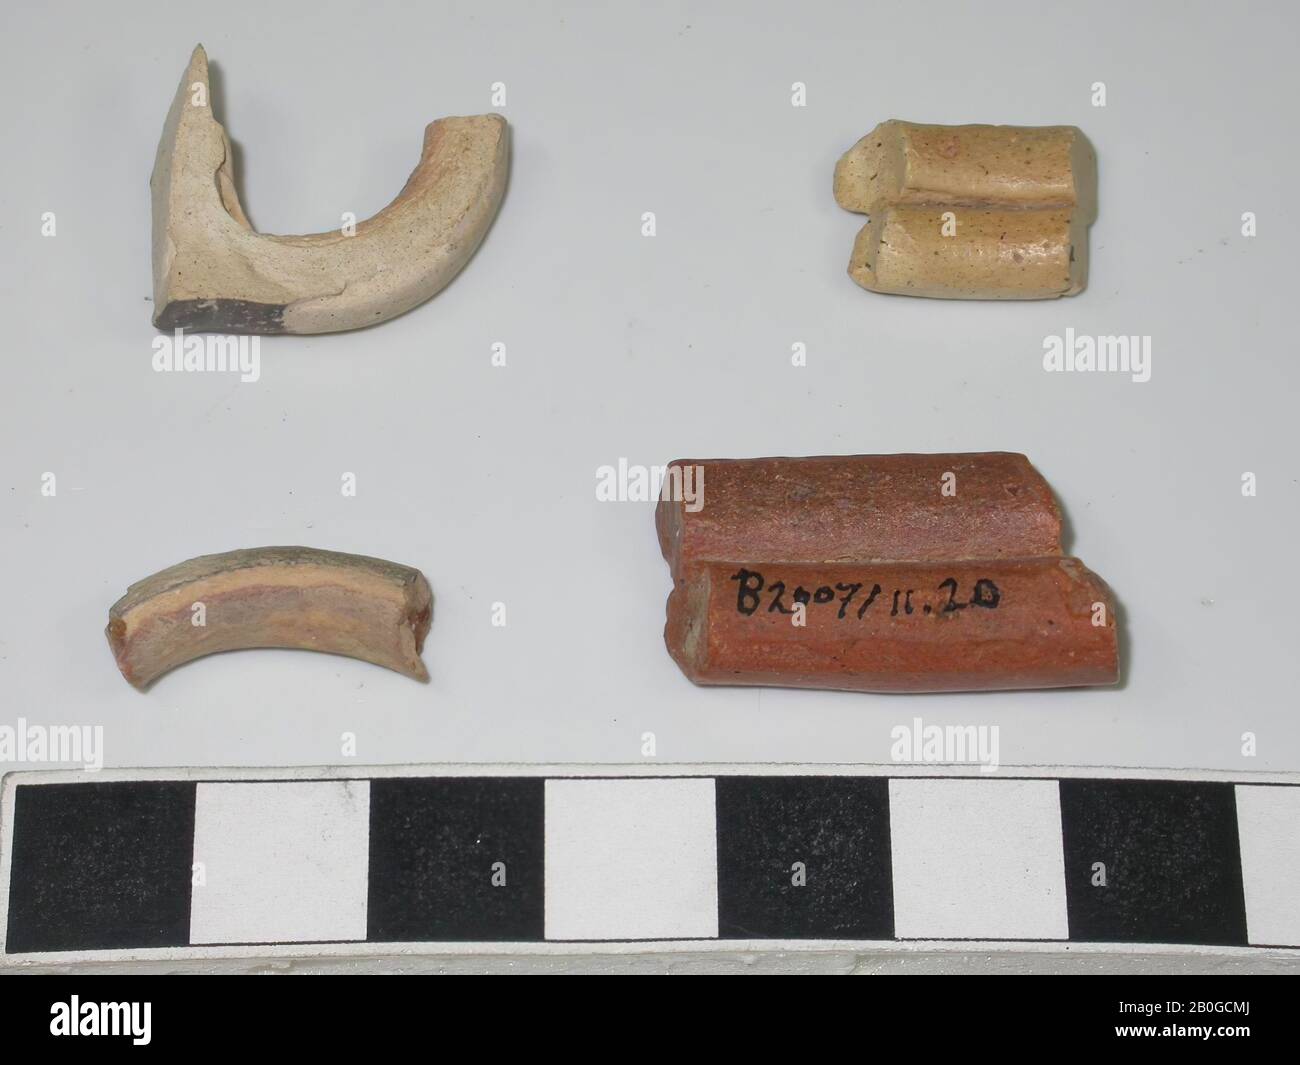 4 fragments of ears of pitchers. All have been part of ears with more than one strip of clay next to each other. 3 fragments are of white clay (of which 2 with black decoration) and 1 fragment of red clay., Crockery, earthenware, largest: L 2.7 cm., Smallest: L1.4 cm, B 1.1 cm., Late Bronze Age? 1600-1200 BC, Saudi Arabia Stock Photo